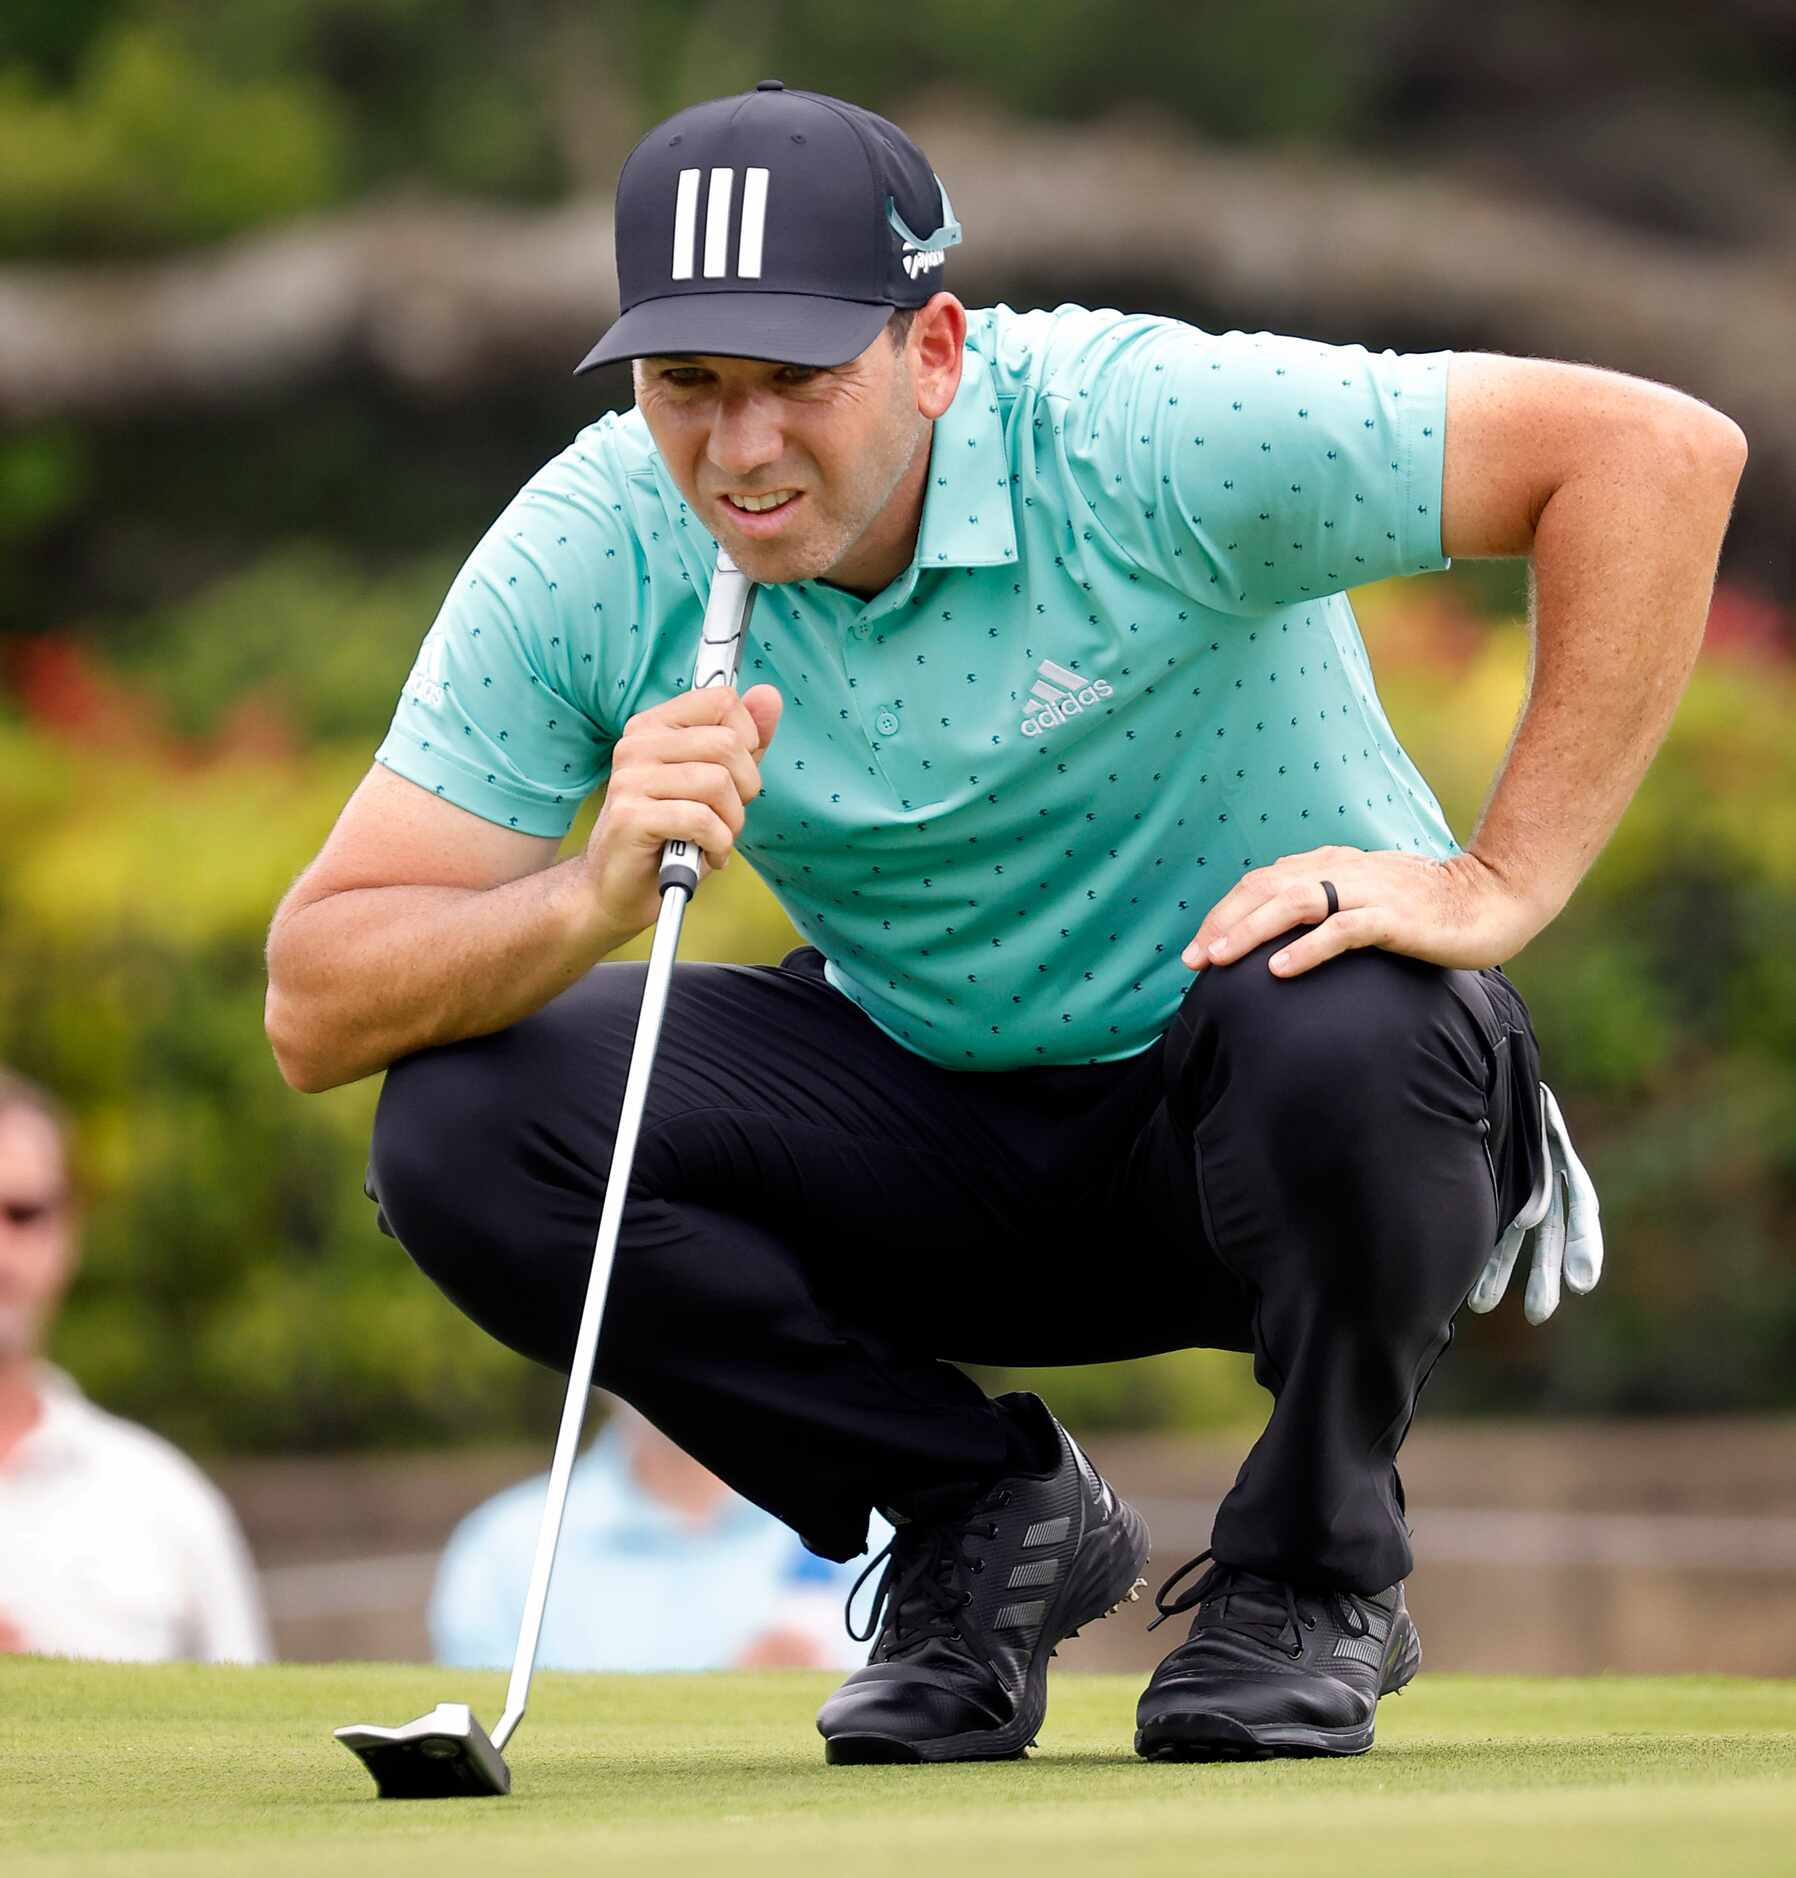 Professional golfer Sergio Garcialinesup his putt on No. 17 during round one of the Charles...